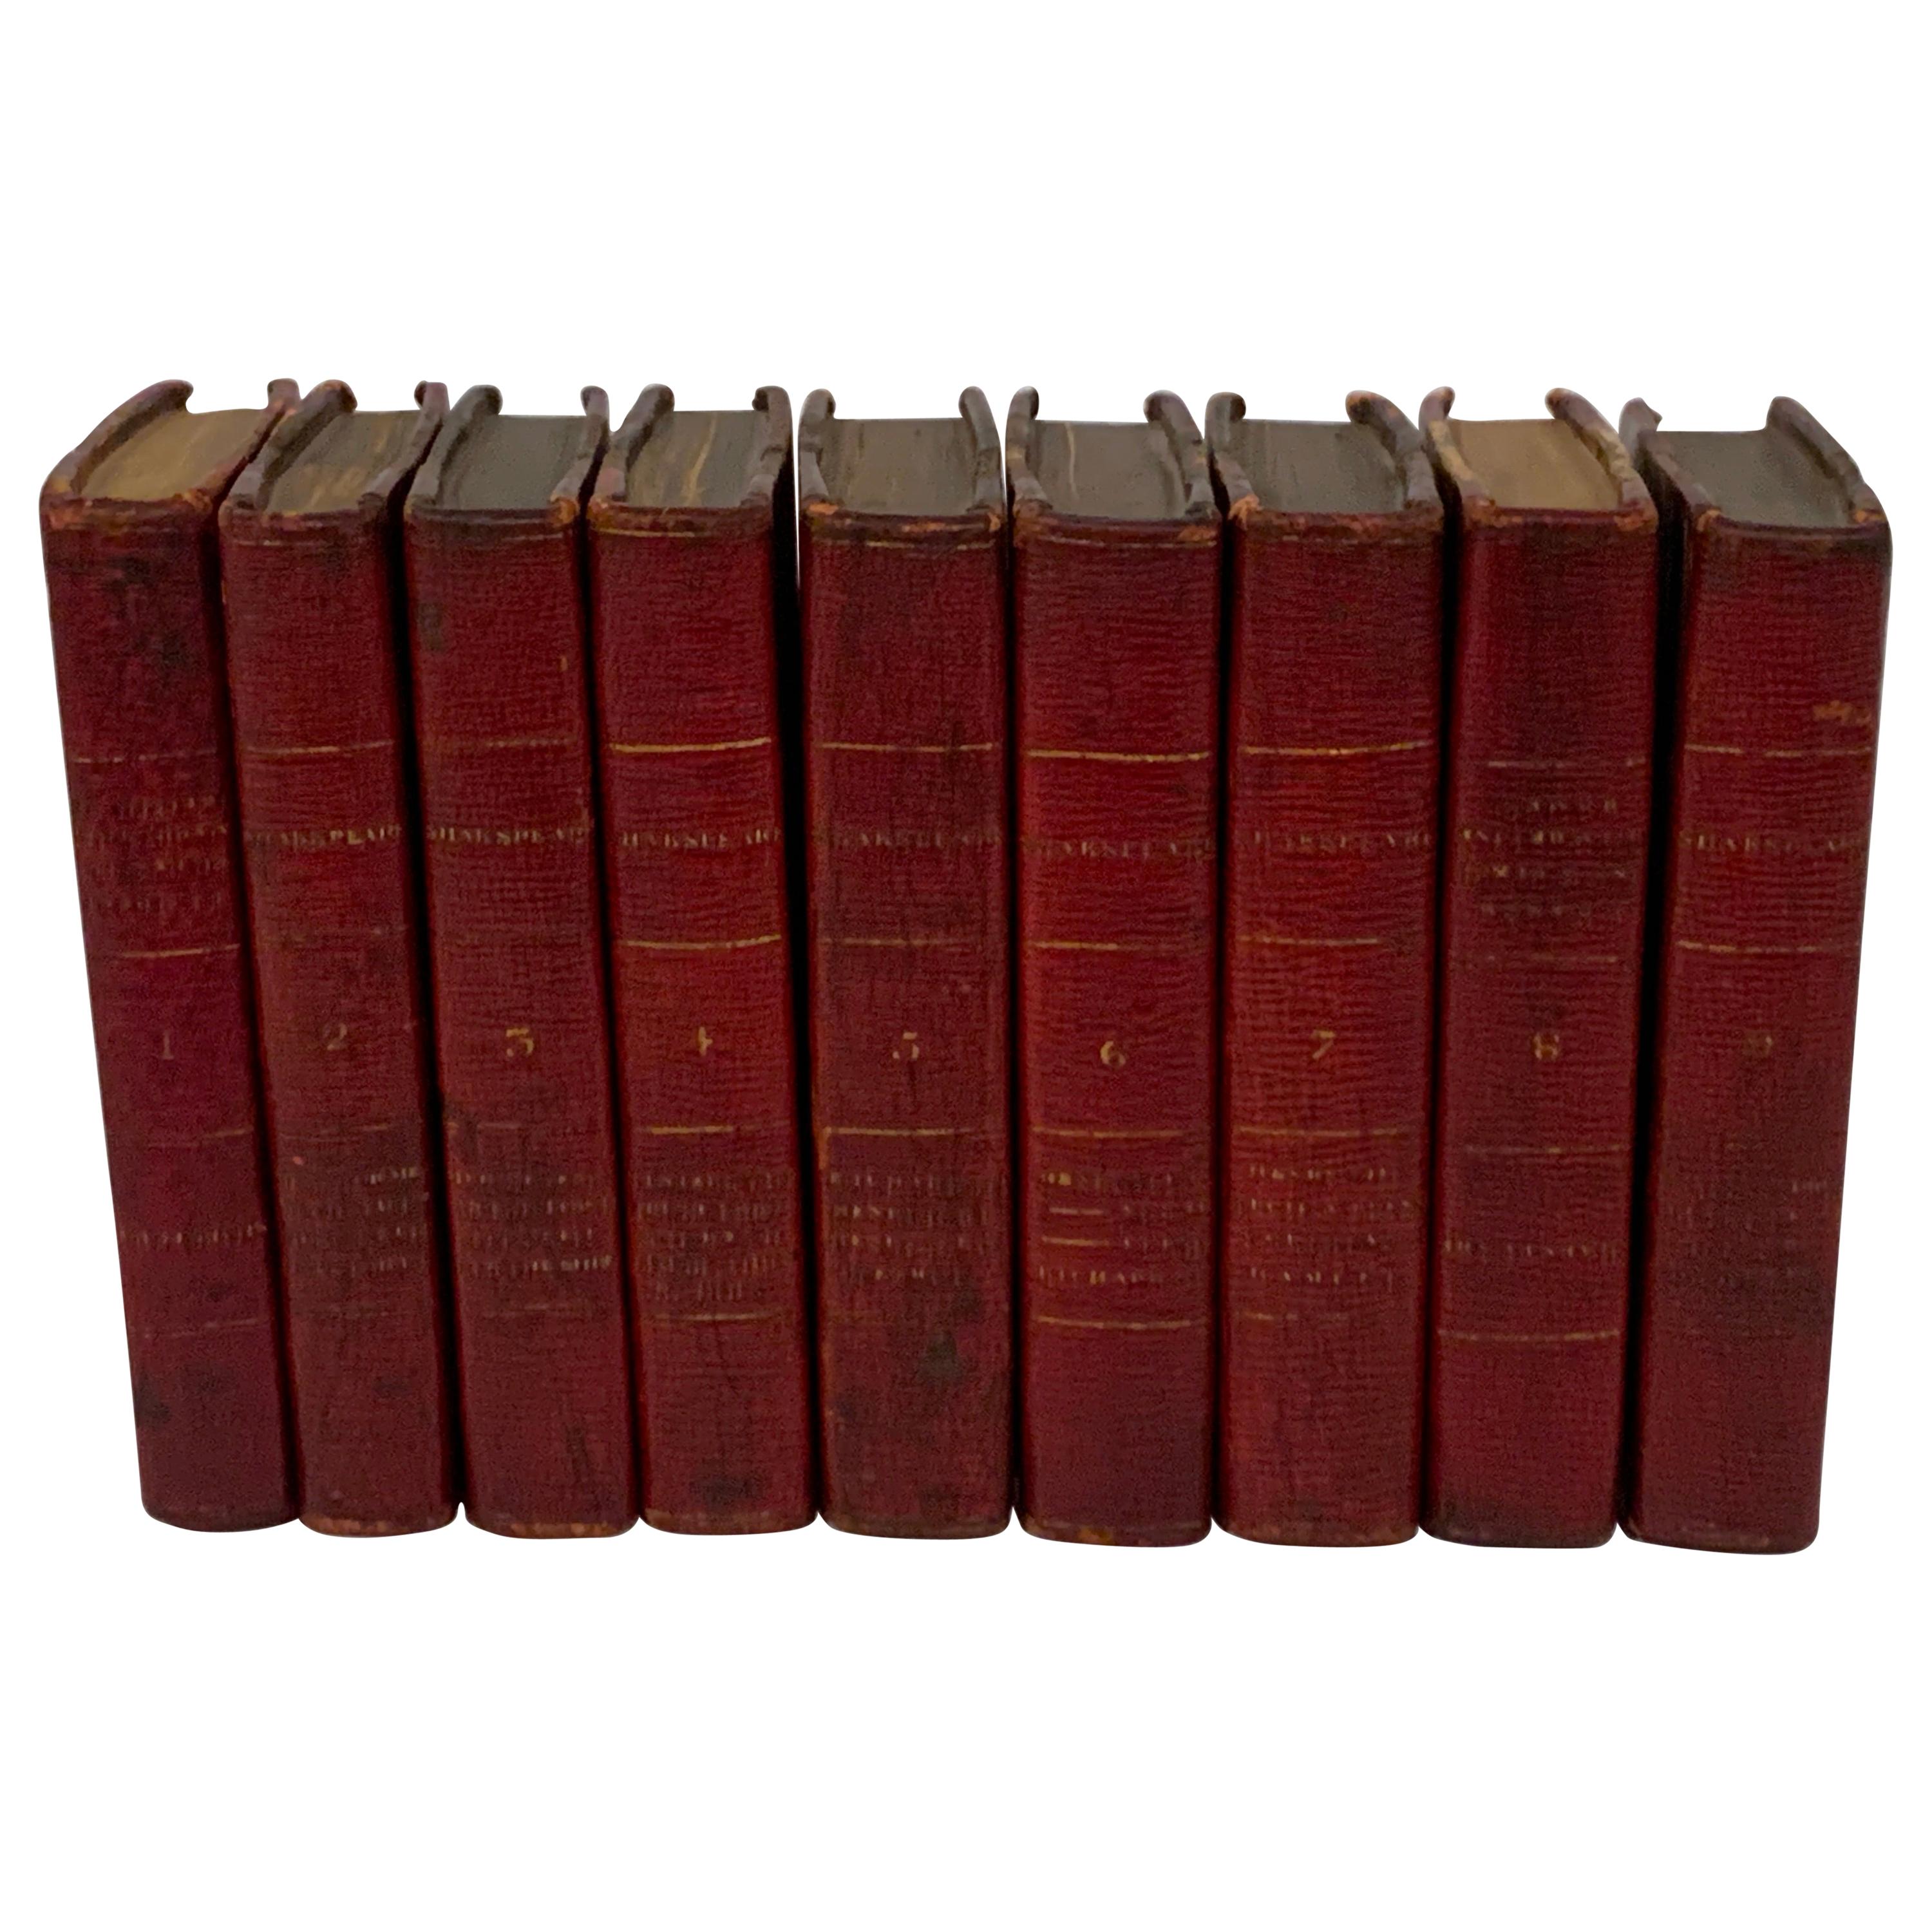 William Shakespeare's Plays in Miniature 9 Volume Leather Bound Volumes, 1803